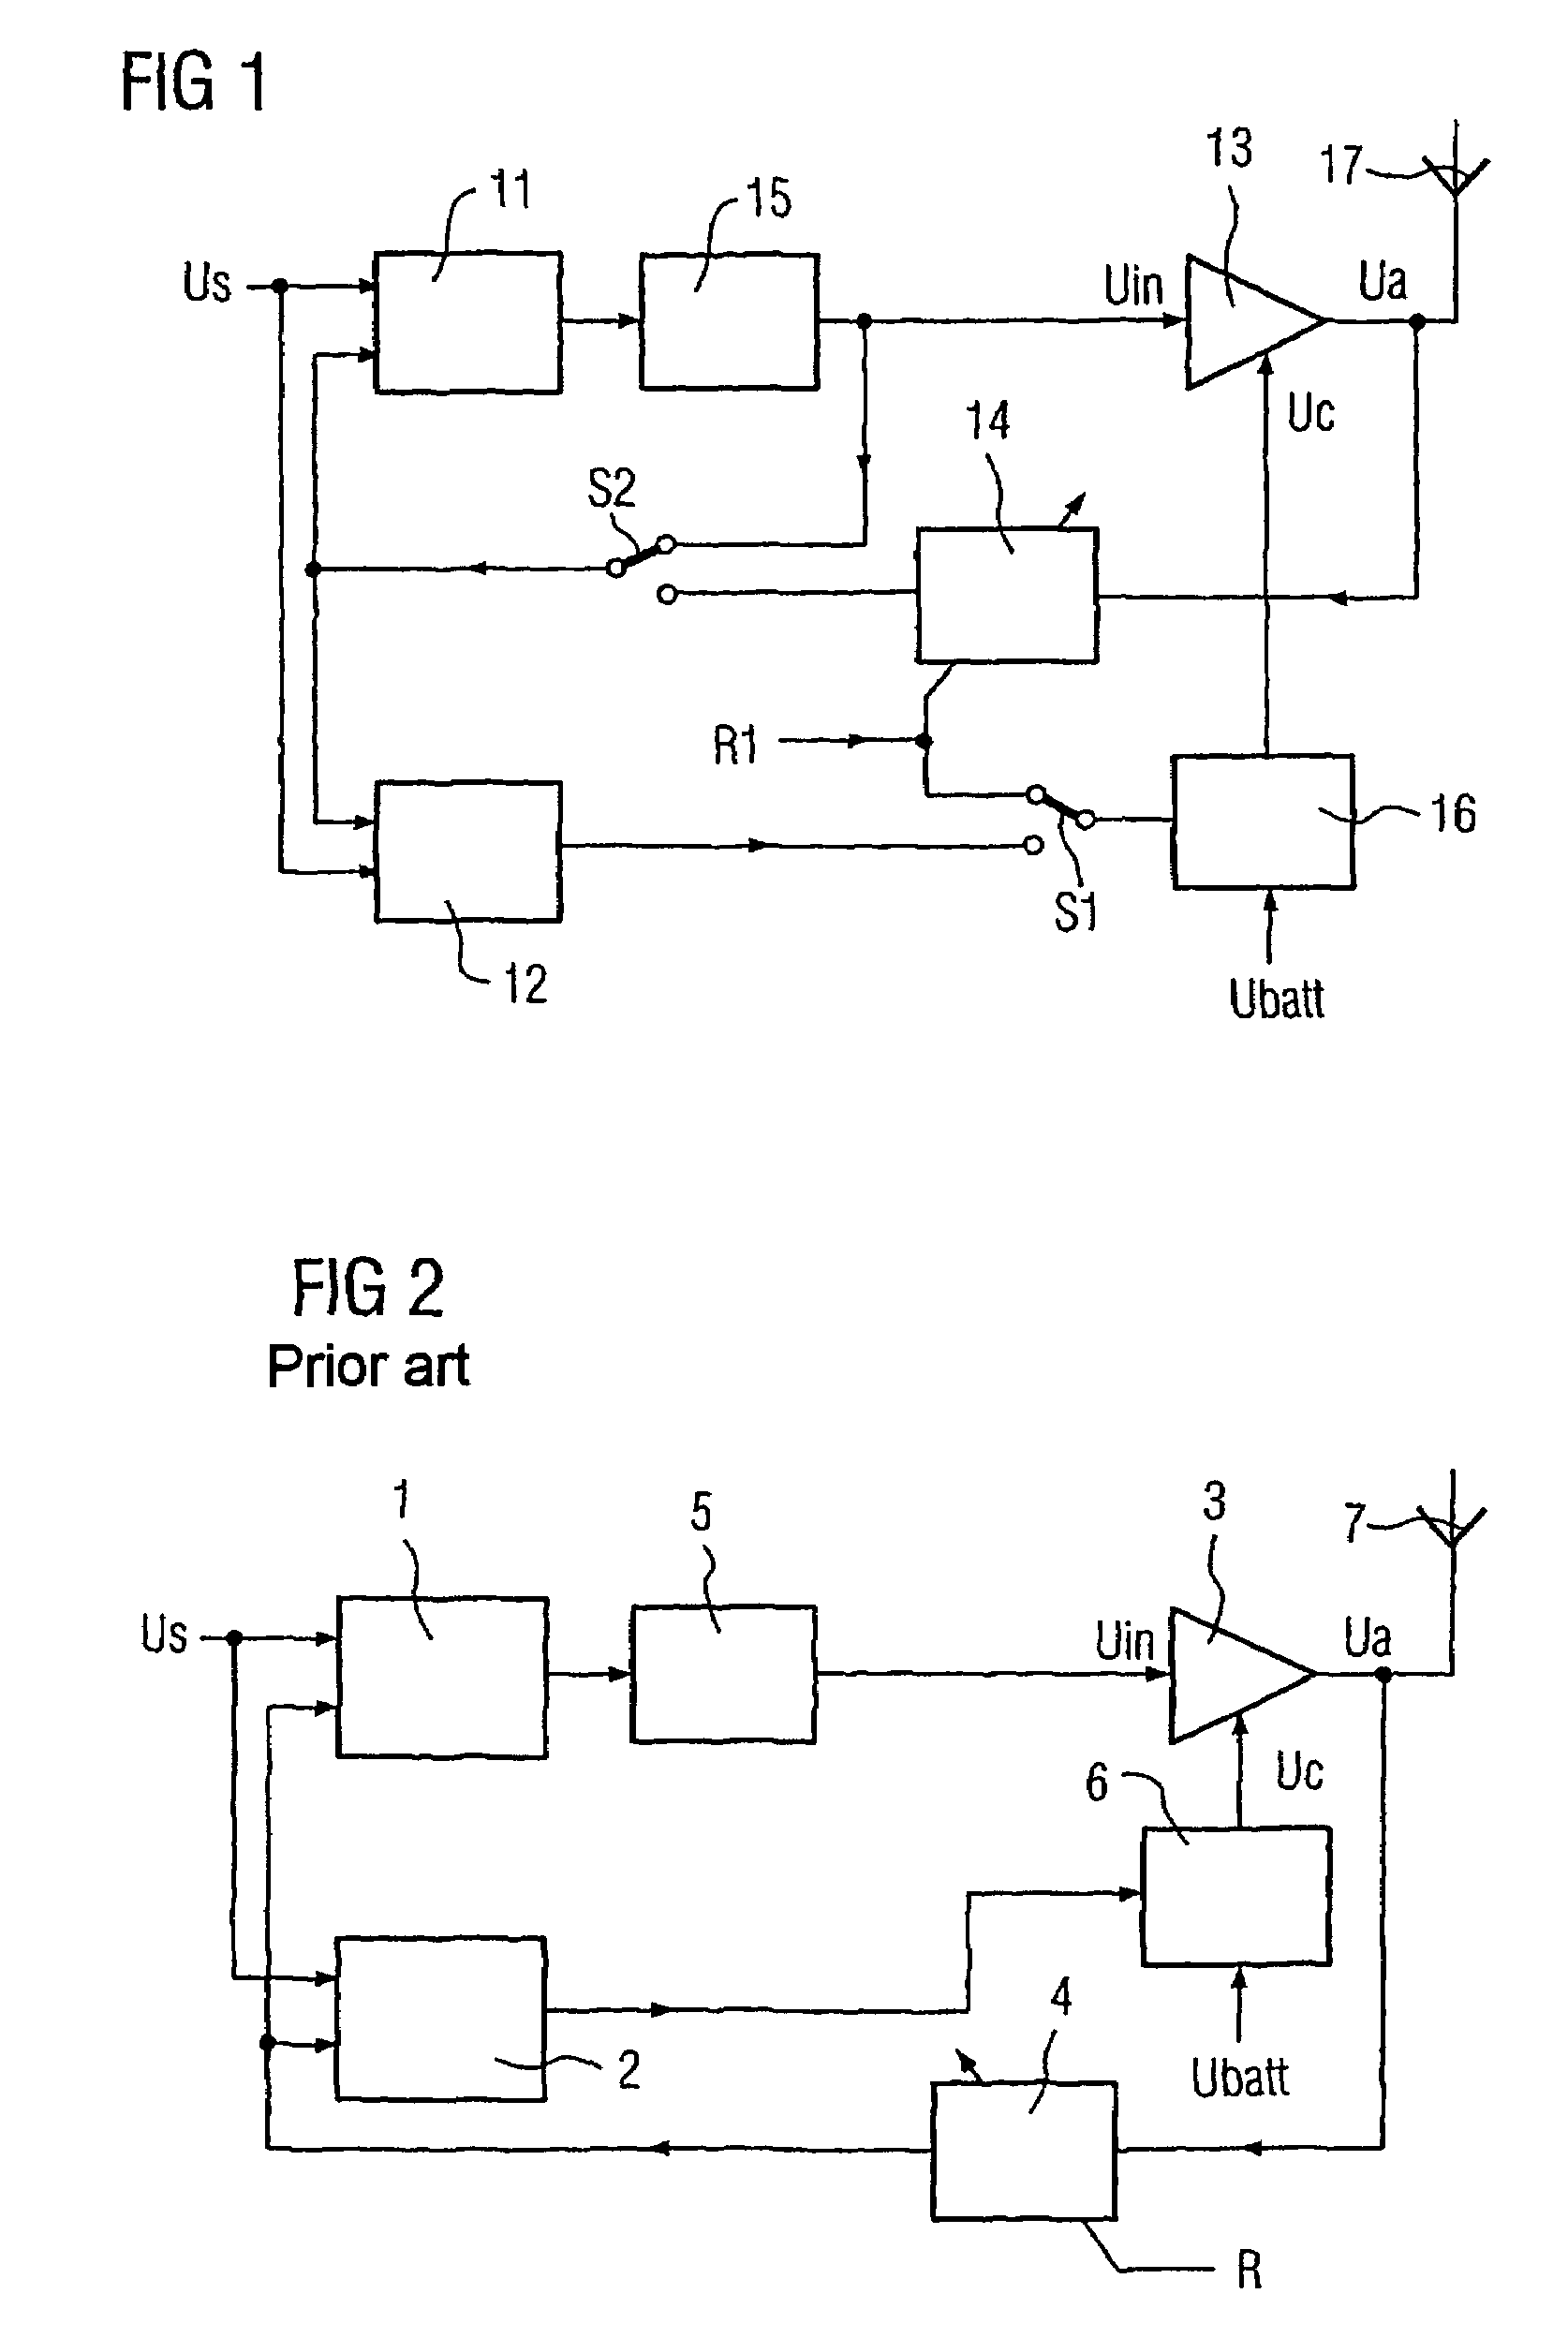 Circuit arrangement for switching a mobile radio transmitter between two modulation modes